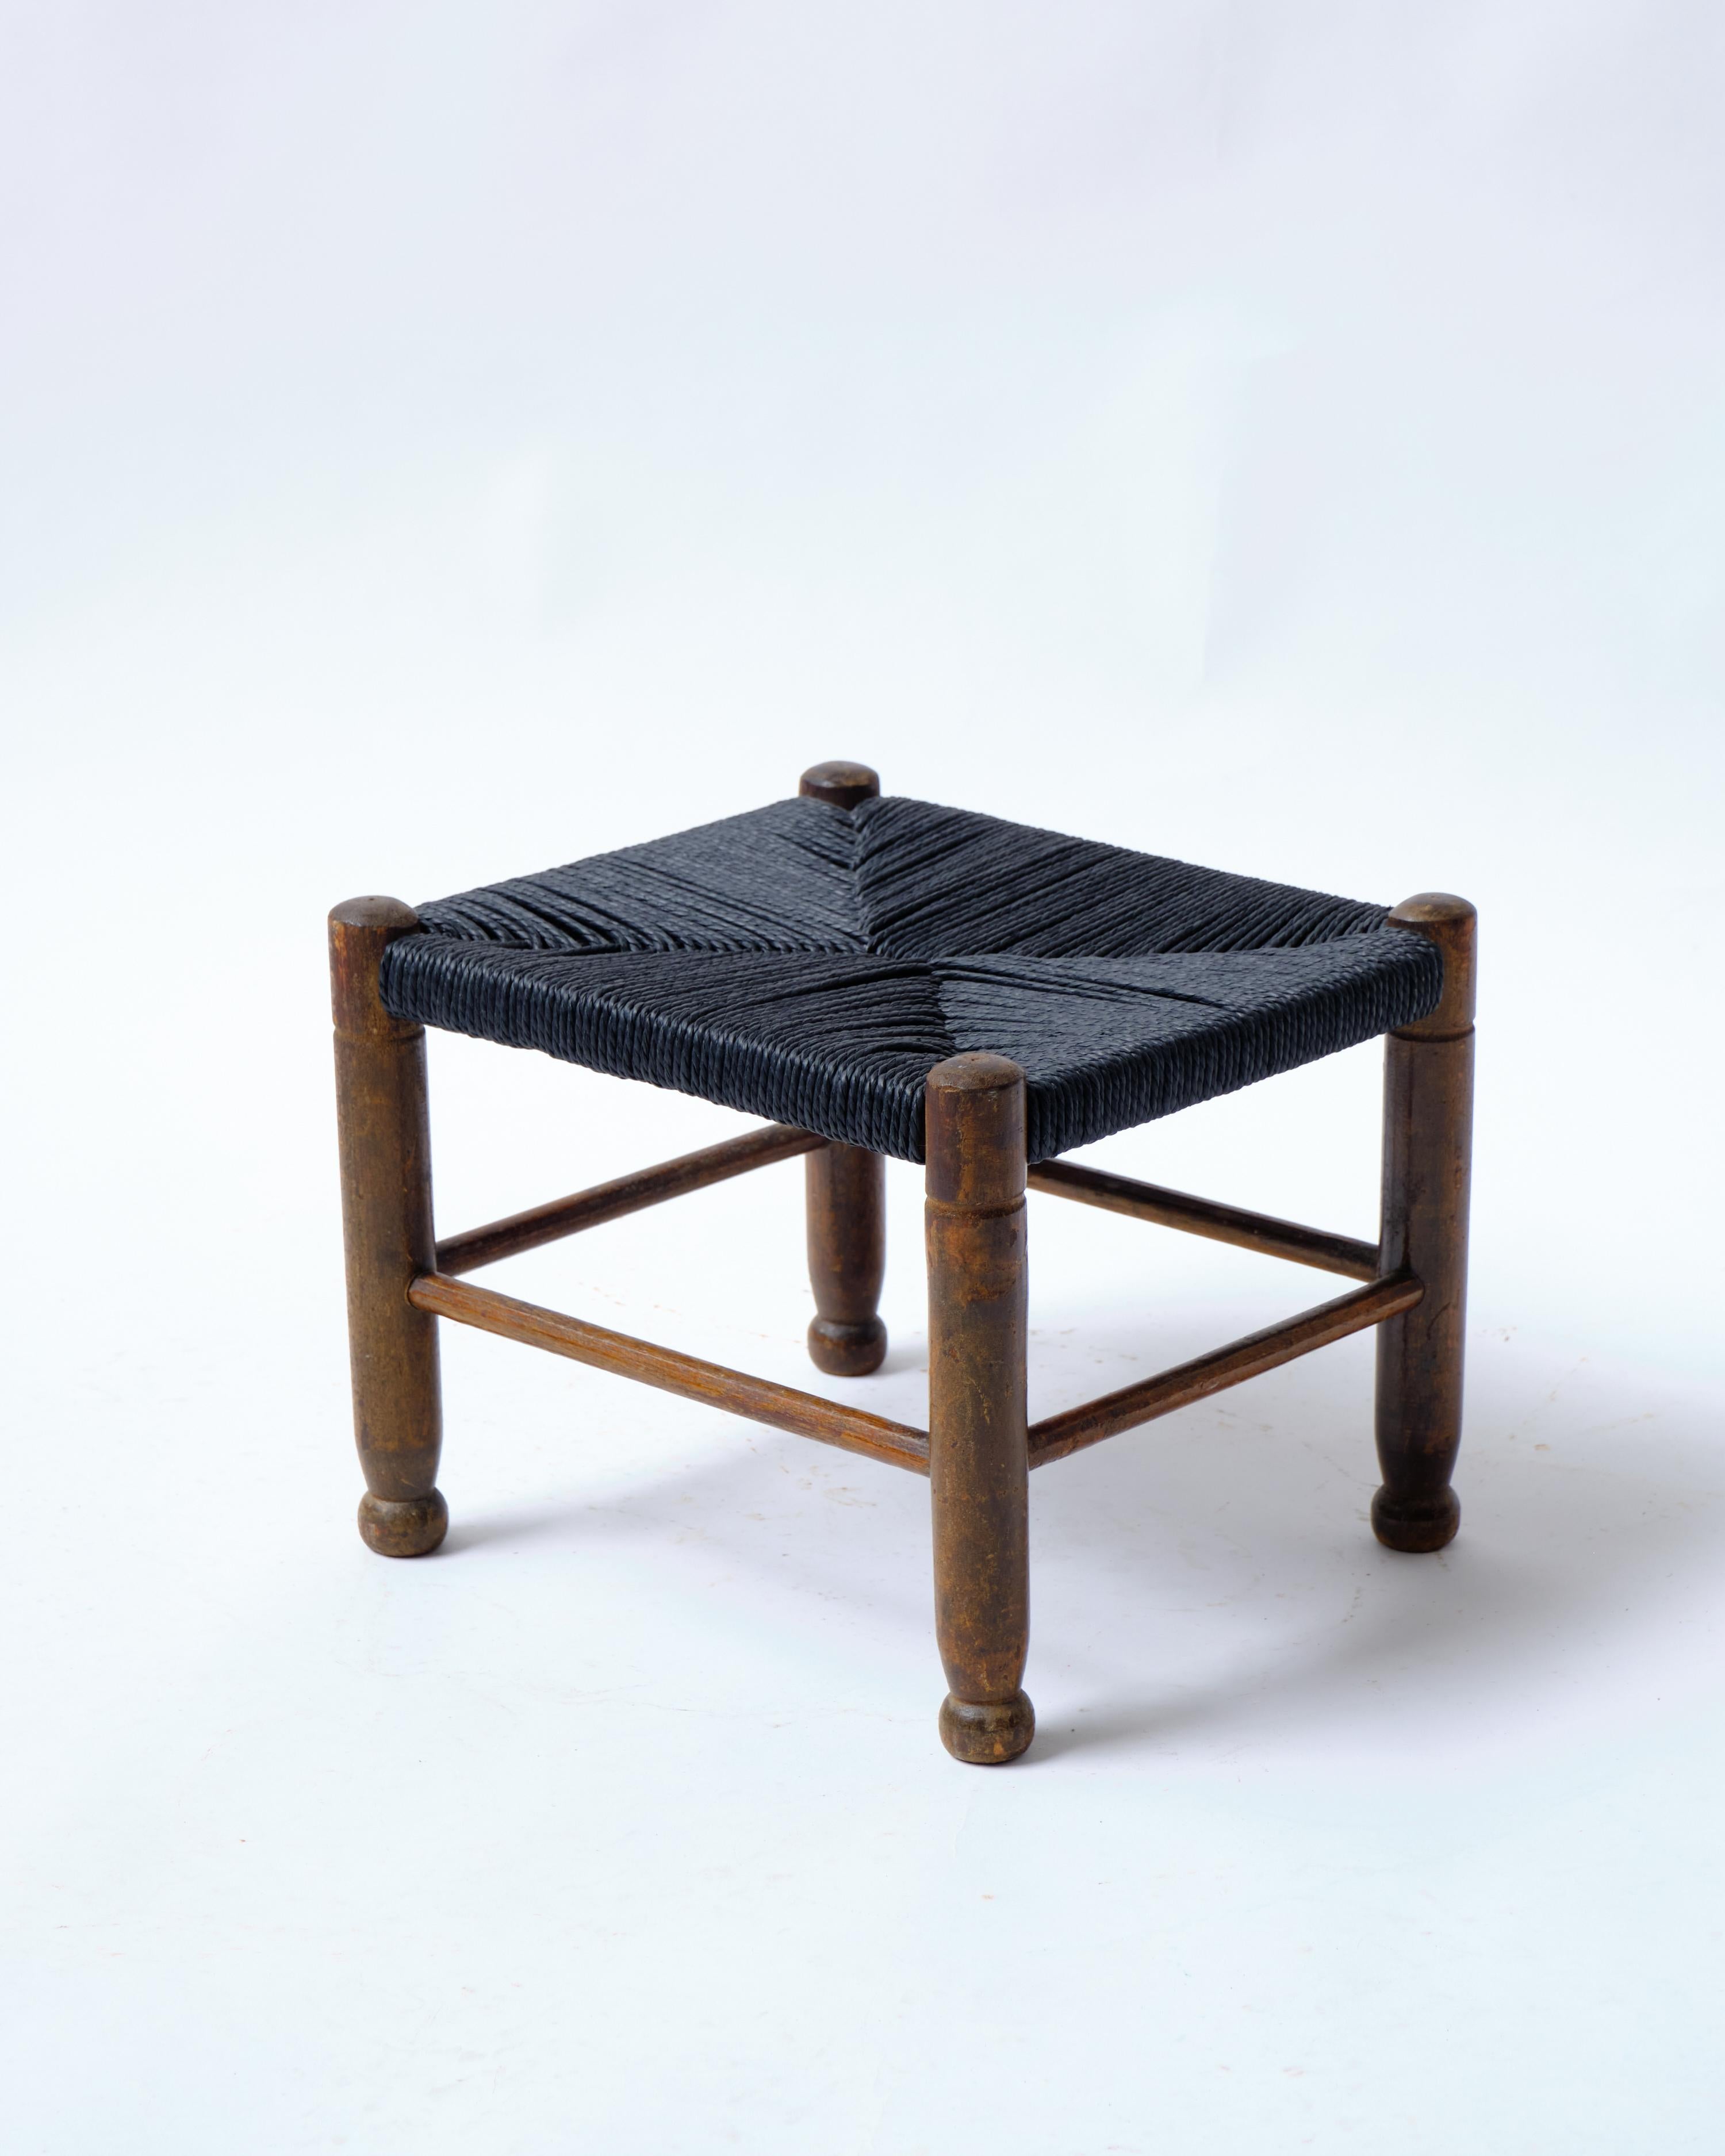 Low Woven Simple Stool, British Vernacular, Early 20th Century  In Good Condition For Sale In Edinburgh, Scotland